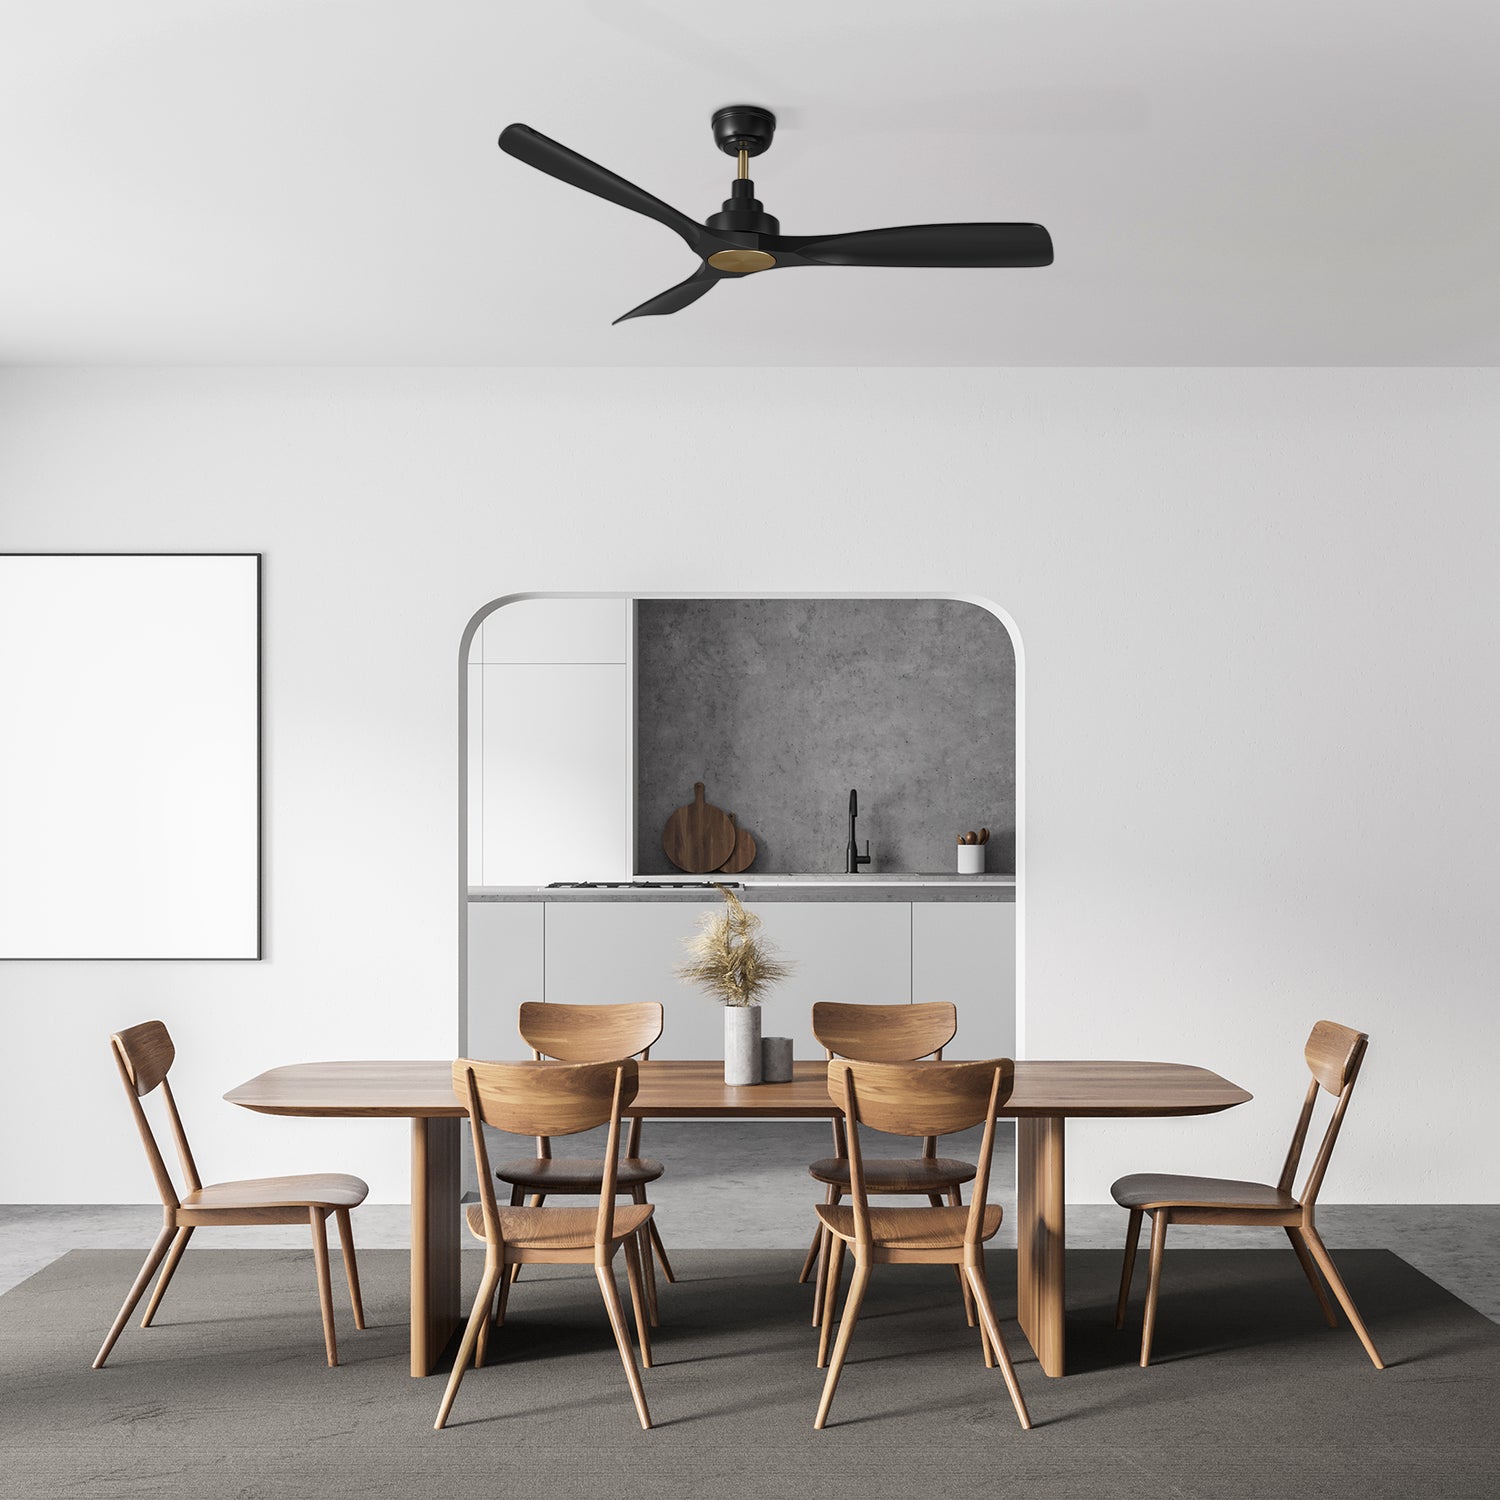 This Kilmory 52&quot; ceiling fan keeps your space cool and stylish. It is a soft modern masterpiece perfect for your large indoor living spaces. This ceiling fan is a simplicity designing with Black finish, use very strong ABS blades. The fan features Remote control to set fan preferences. 